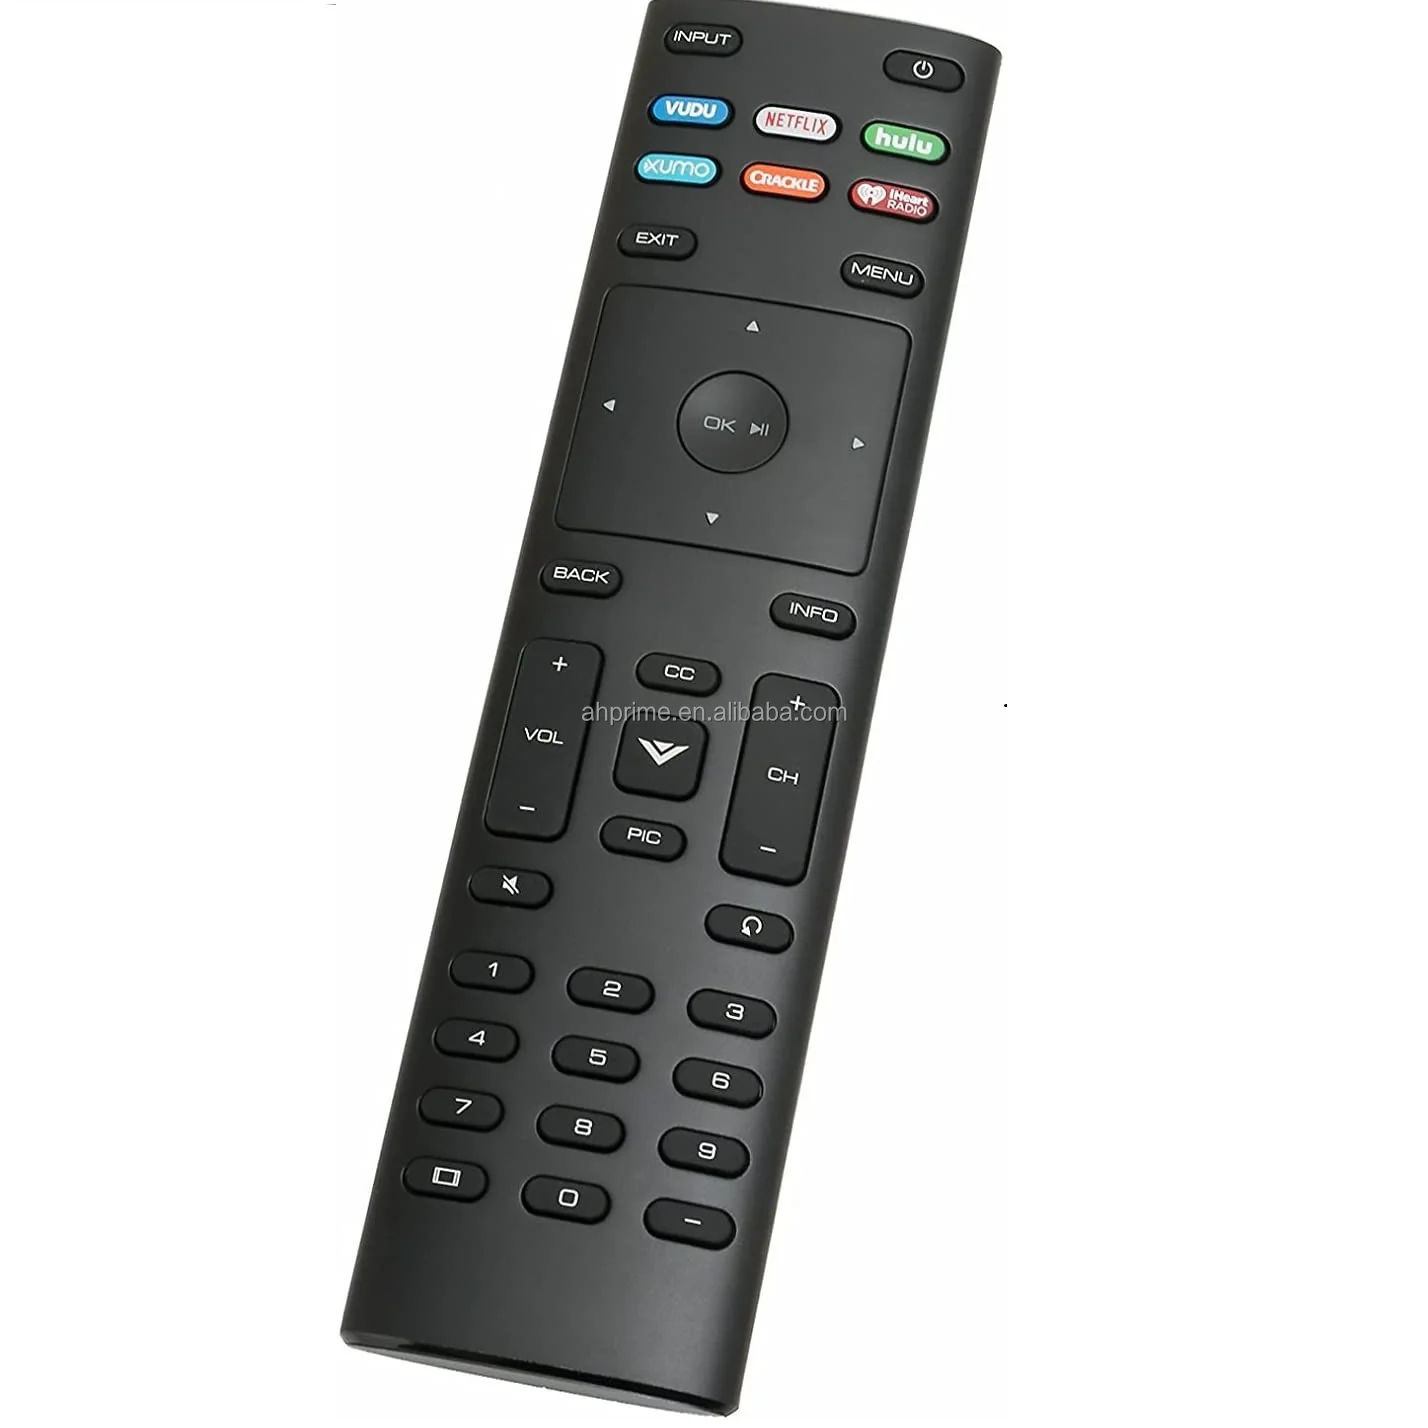 Source Remote control XRT136 with Hulu Button use for Vizio TV D50f-F1 D24f- F1 D43f-F1 E43-E2 E60-E3 on m.alibaba